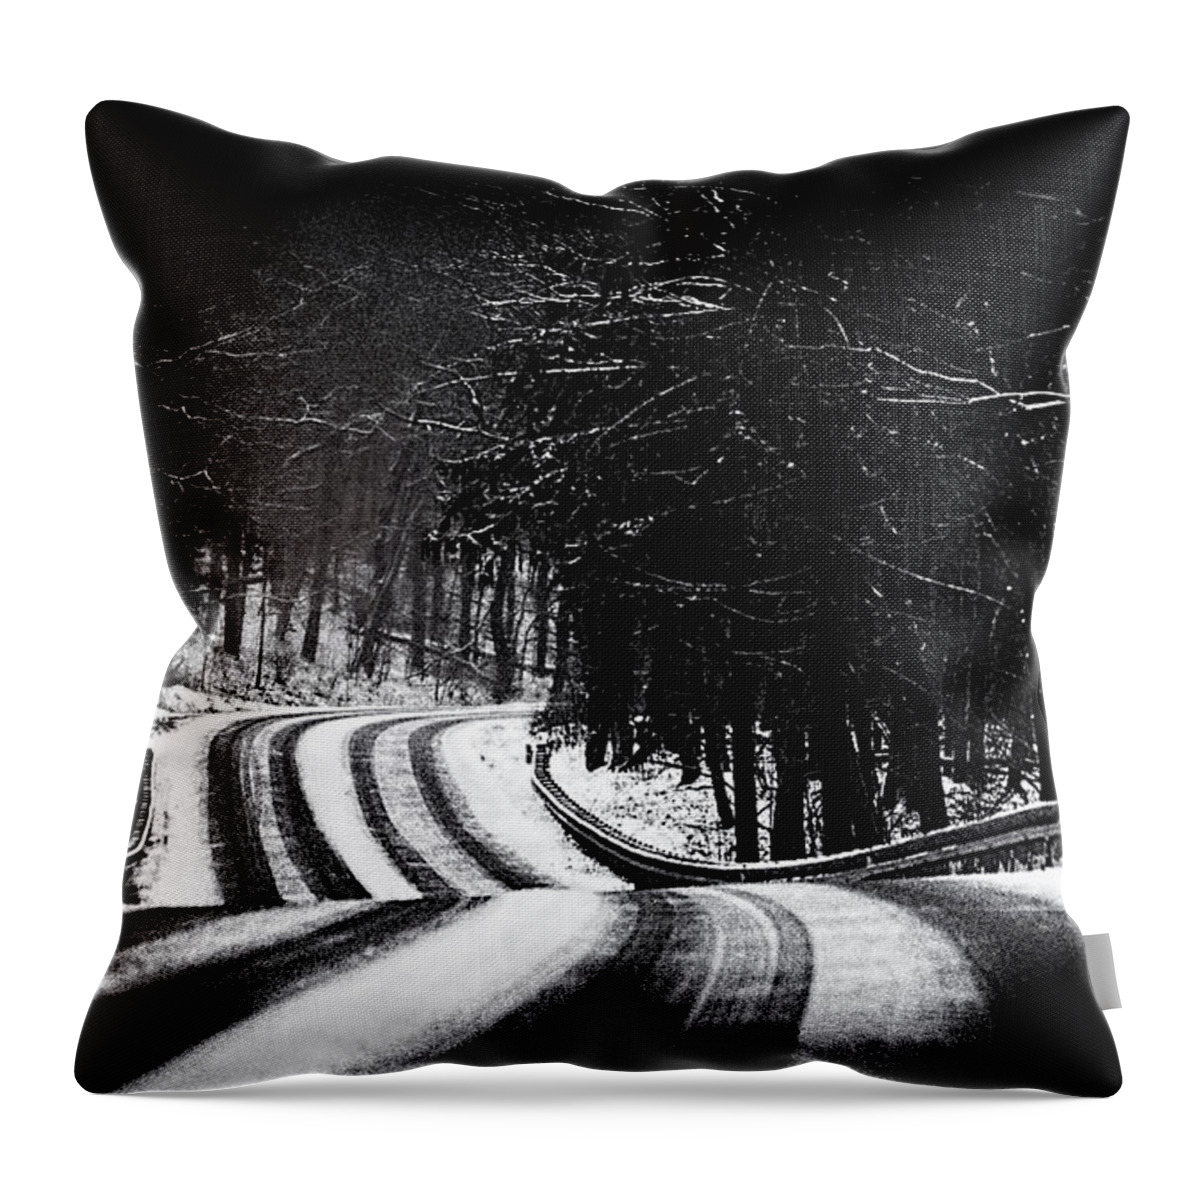 Dark Throw Pillow featuring the photograph The Long and Winding Road by Chris Lord